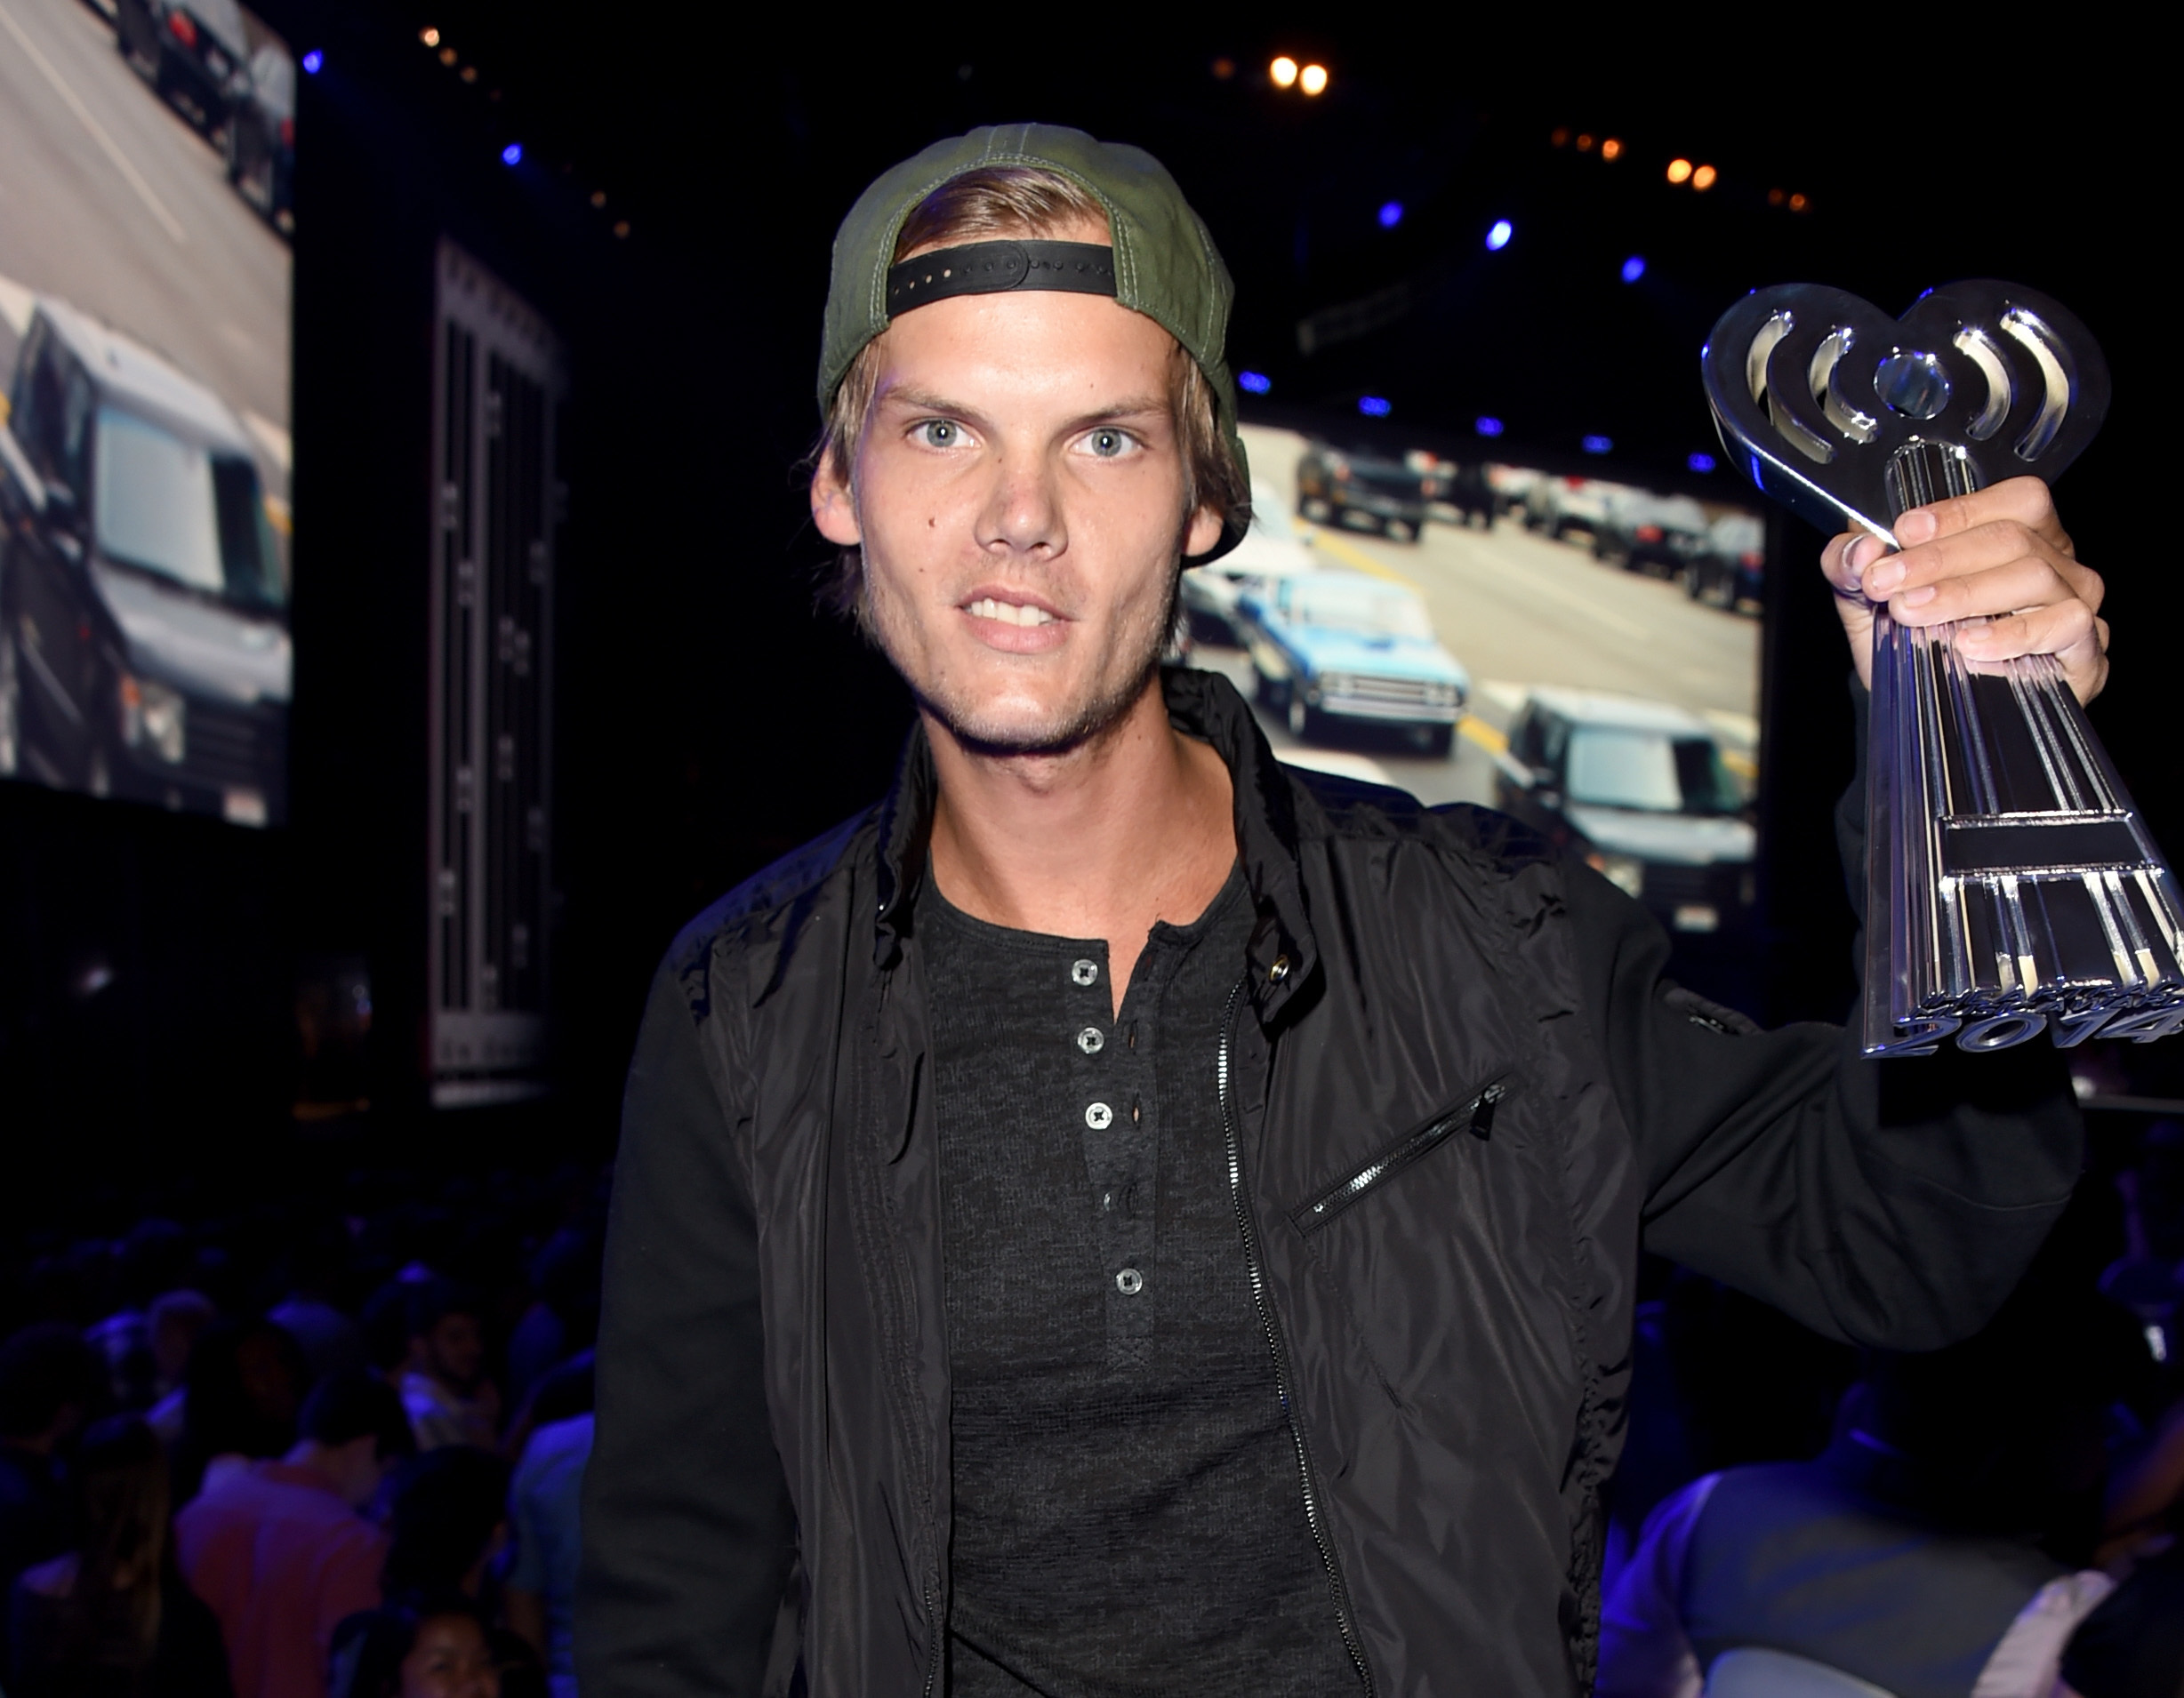 DJ Avicii backstage at the 2014 iHeartRadio Music Awards held at The Shrine Auditorium on May 1, 2014 in Los Angeles, California.